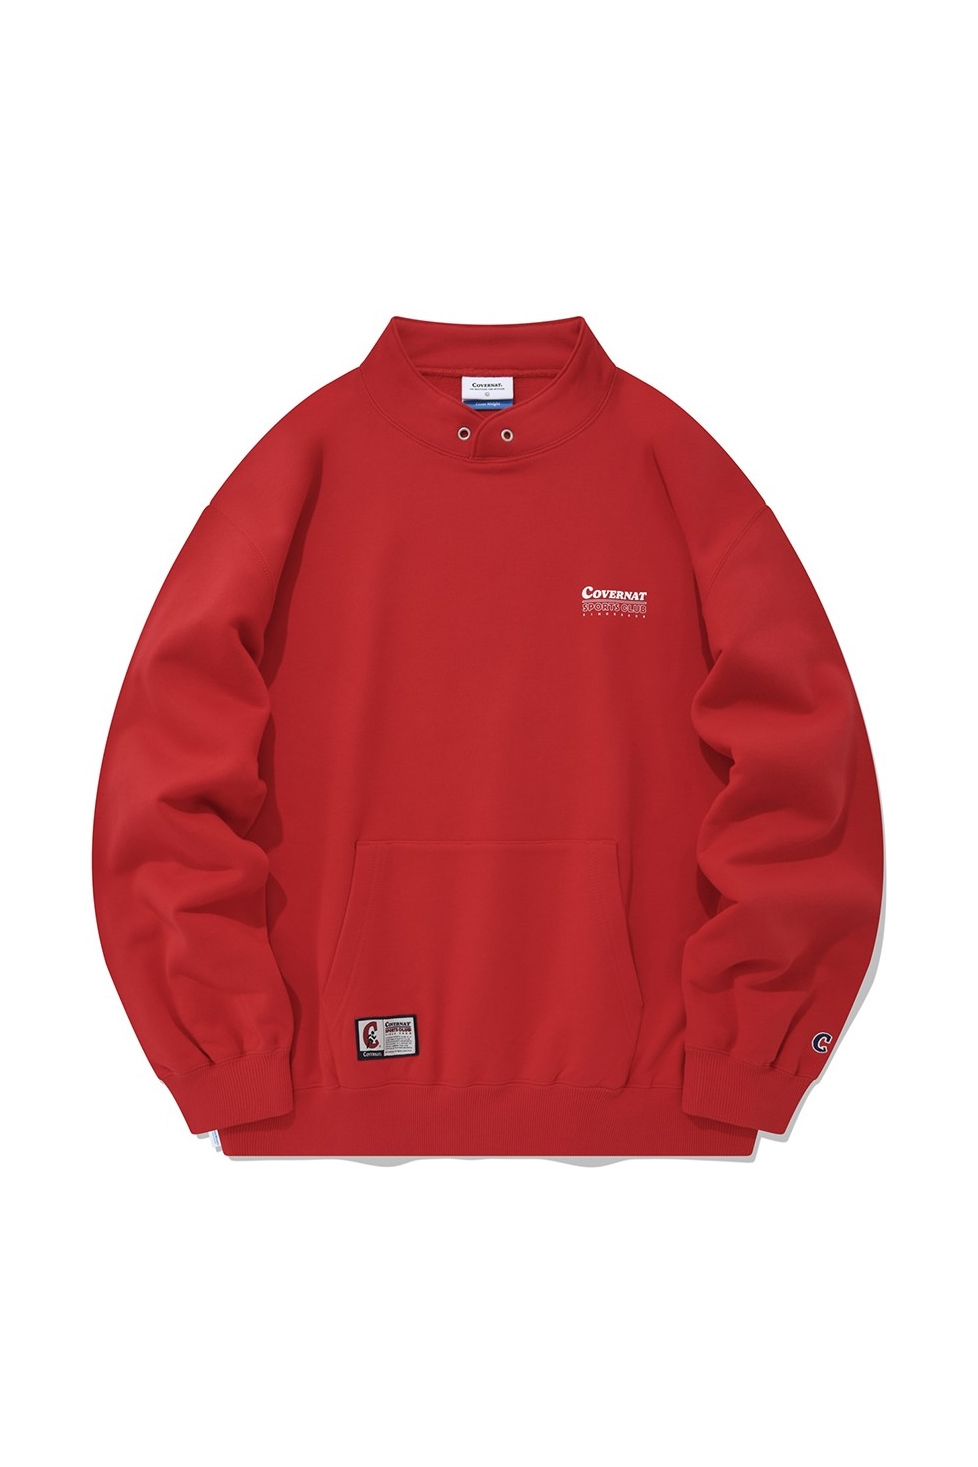 Not That Athletic Club Oversized Crewneck - Pink